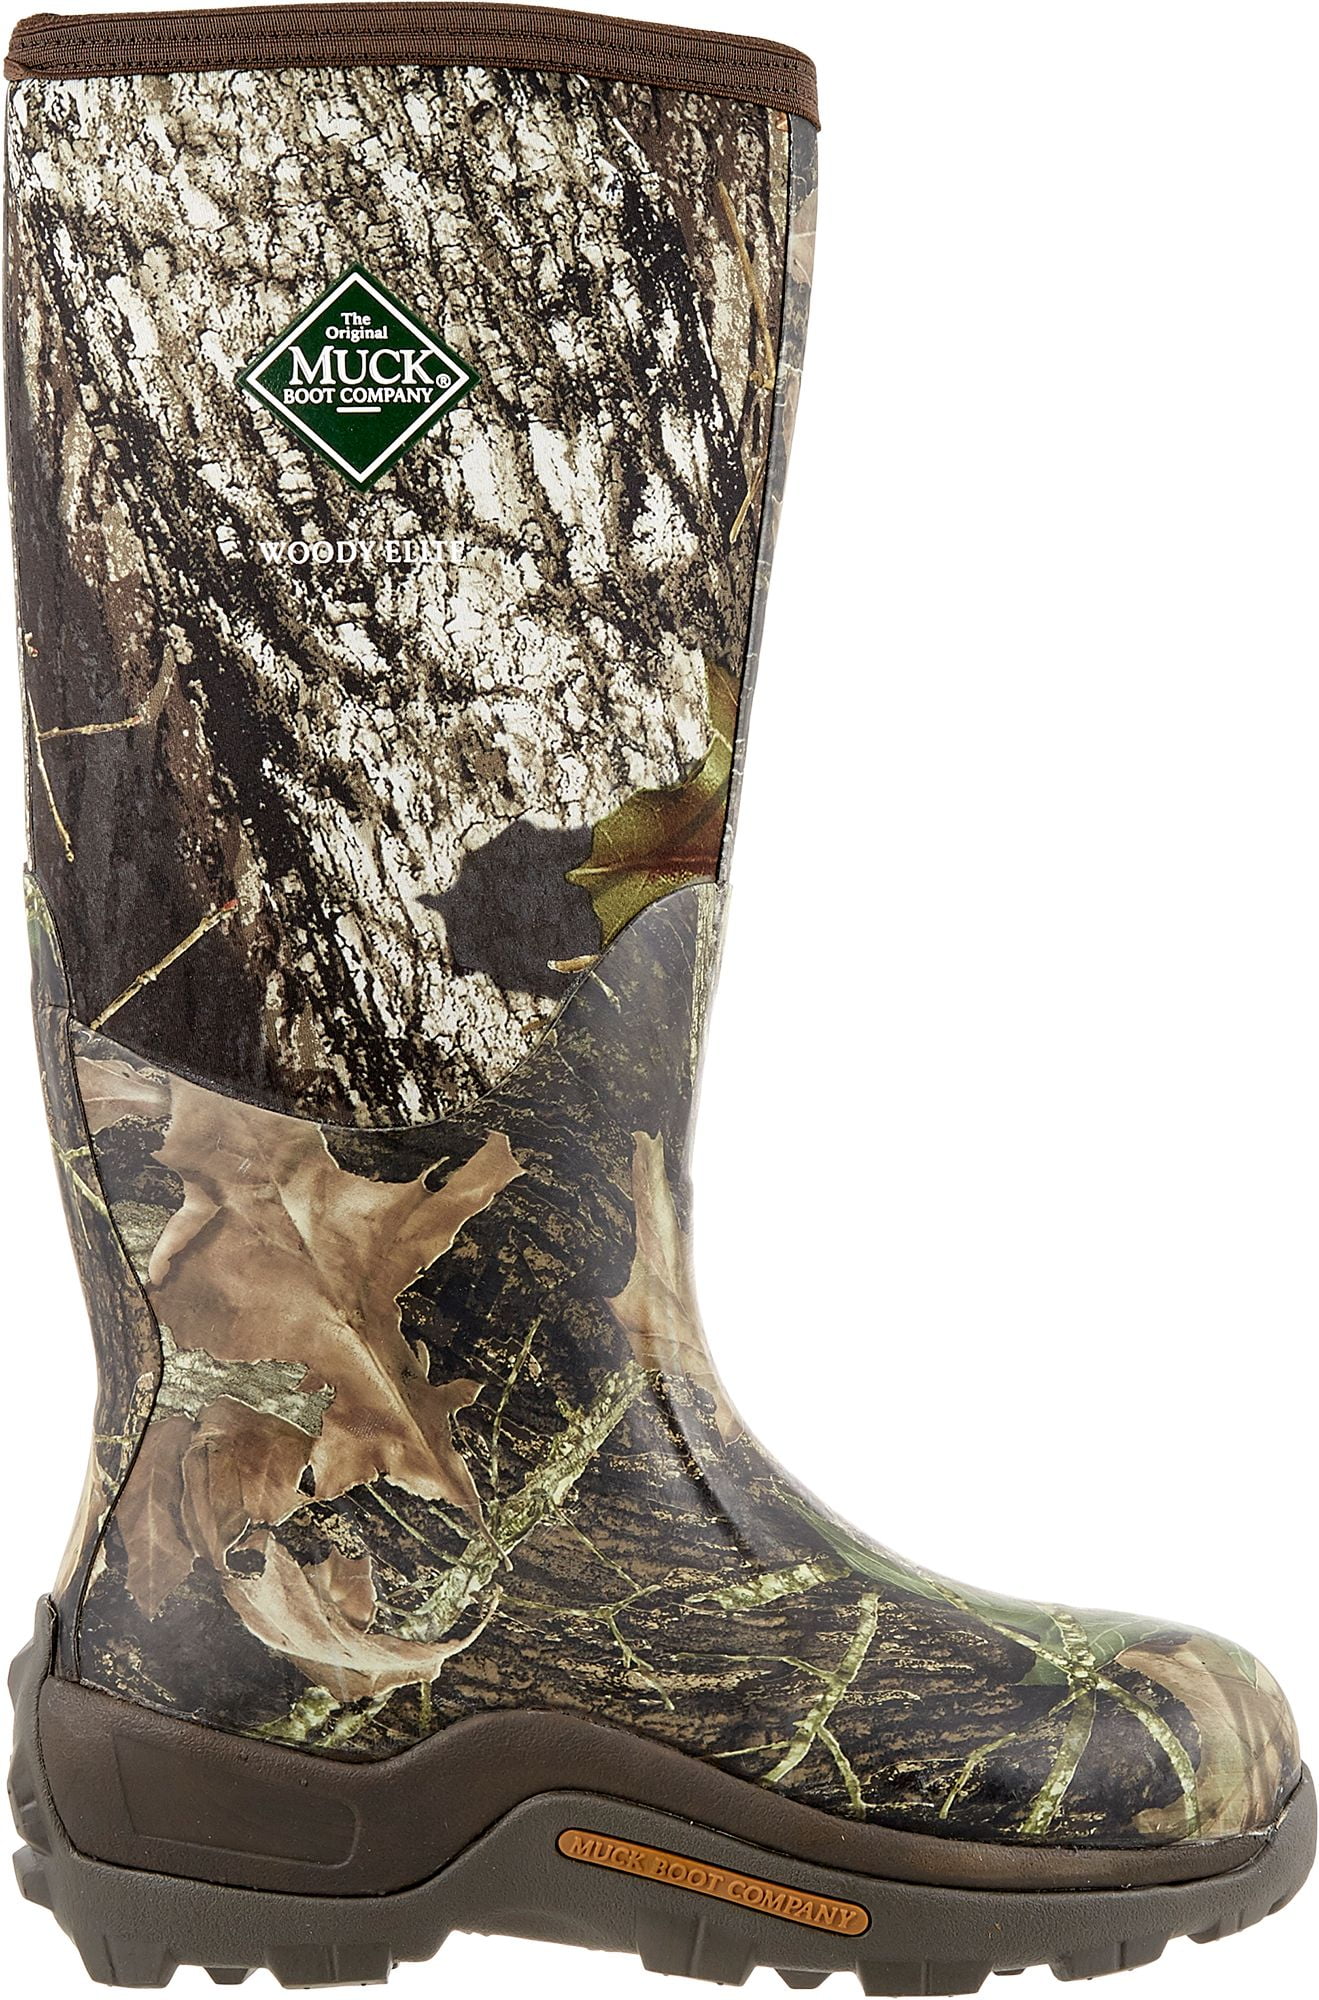 Muck Boot Company Muck Boot Men S Woody Elite Rubber Hunting Boots